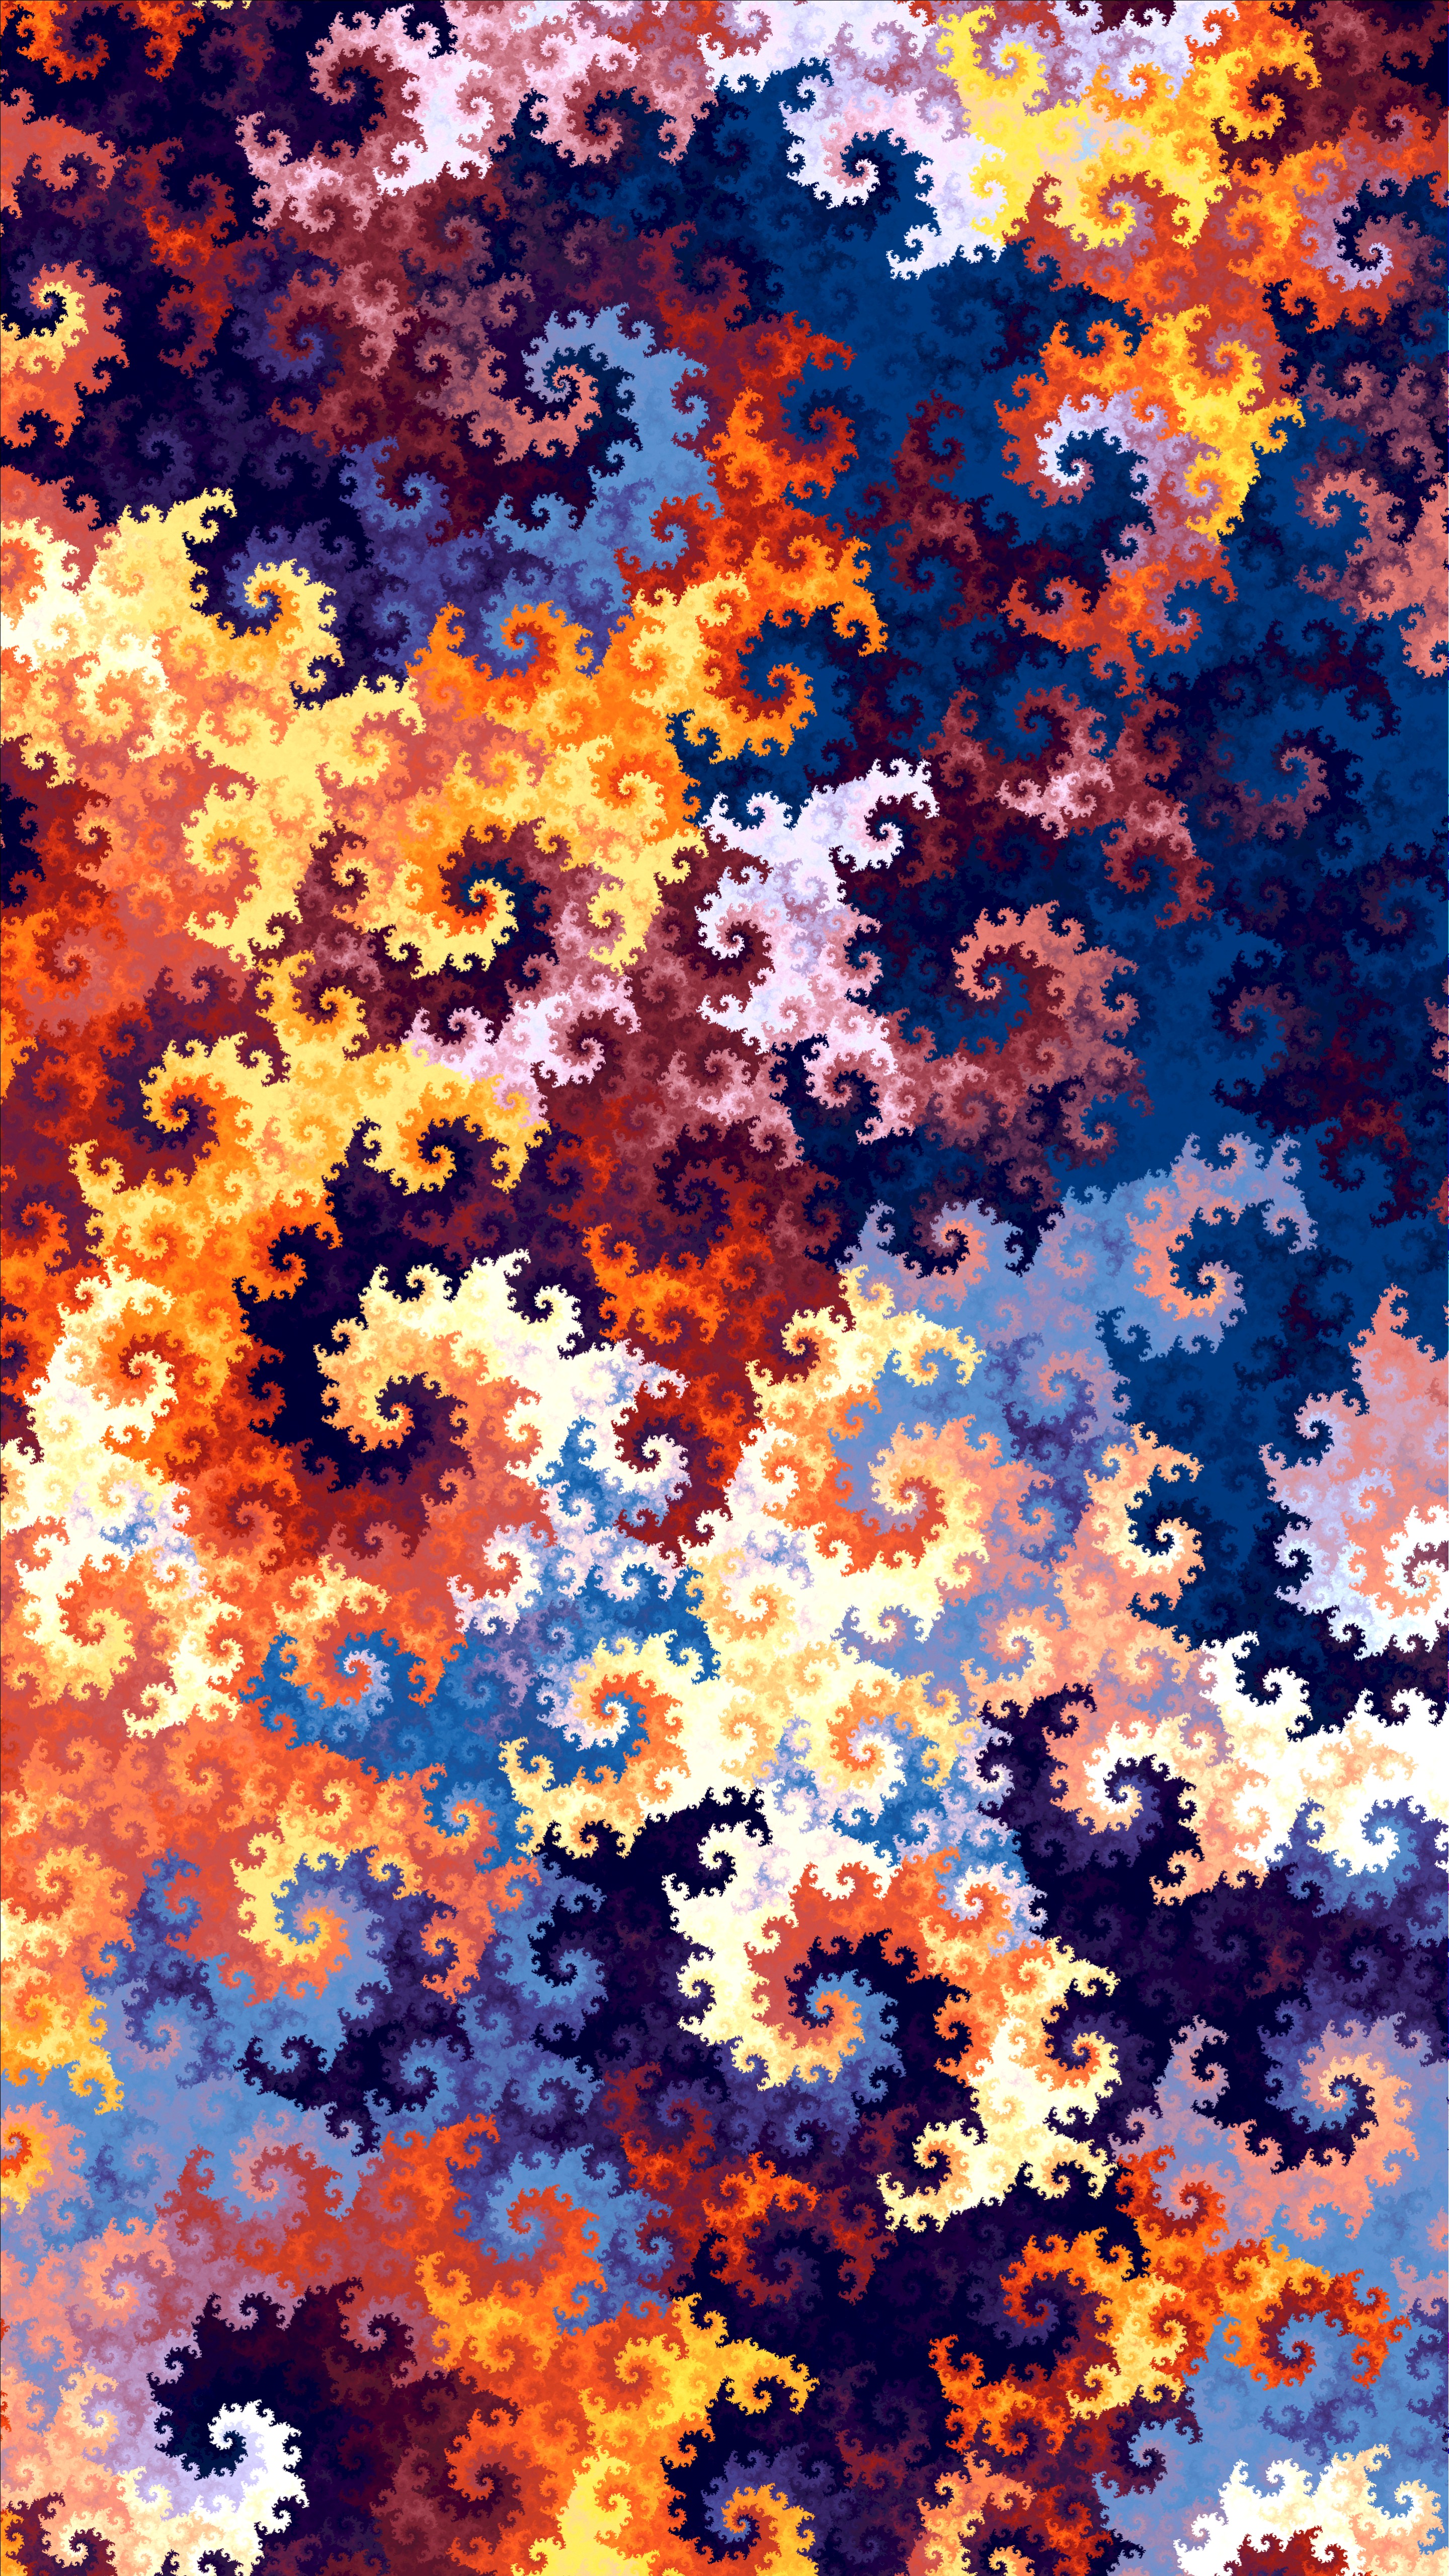 texture, patterns, multicolored, swirling, motley, pattern, textures, spiral, spirals, involute